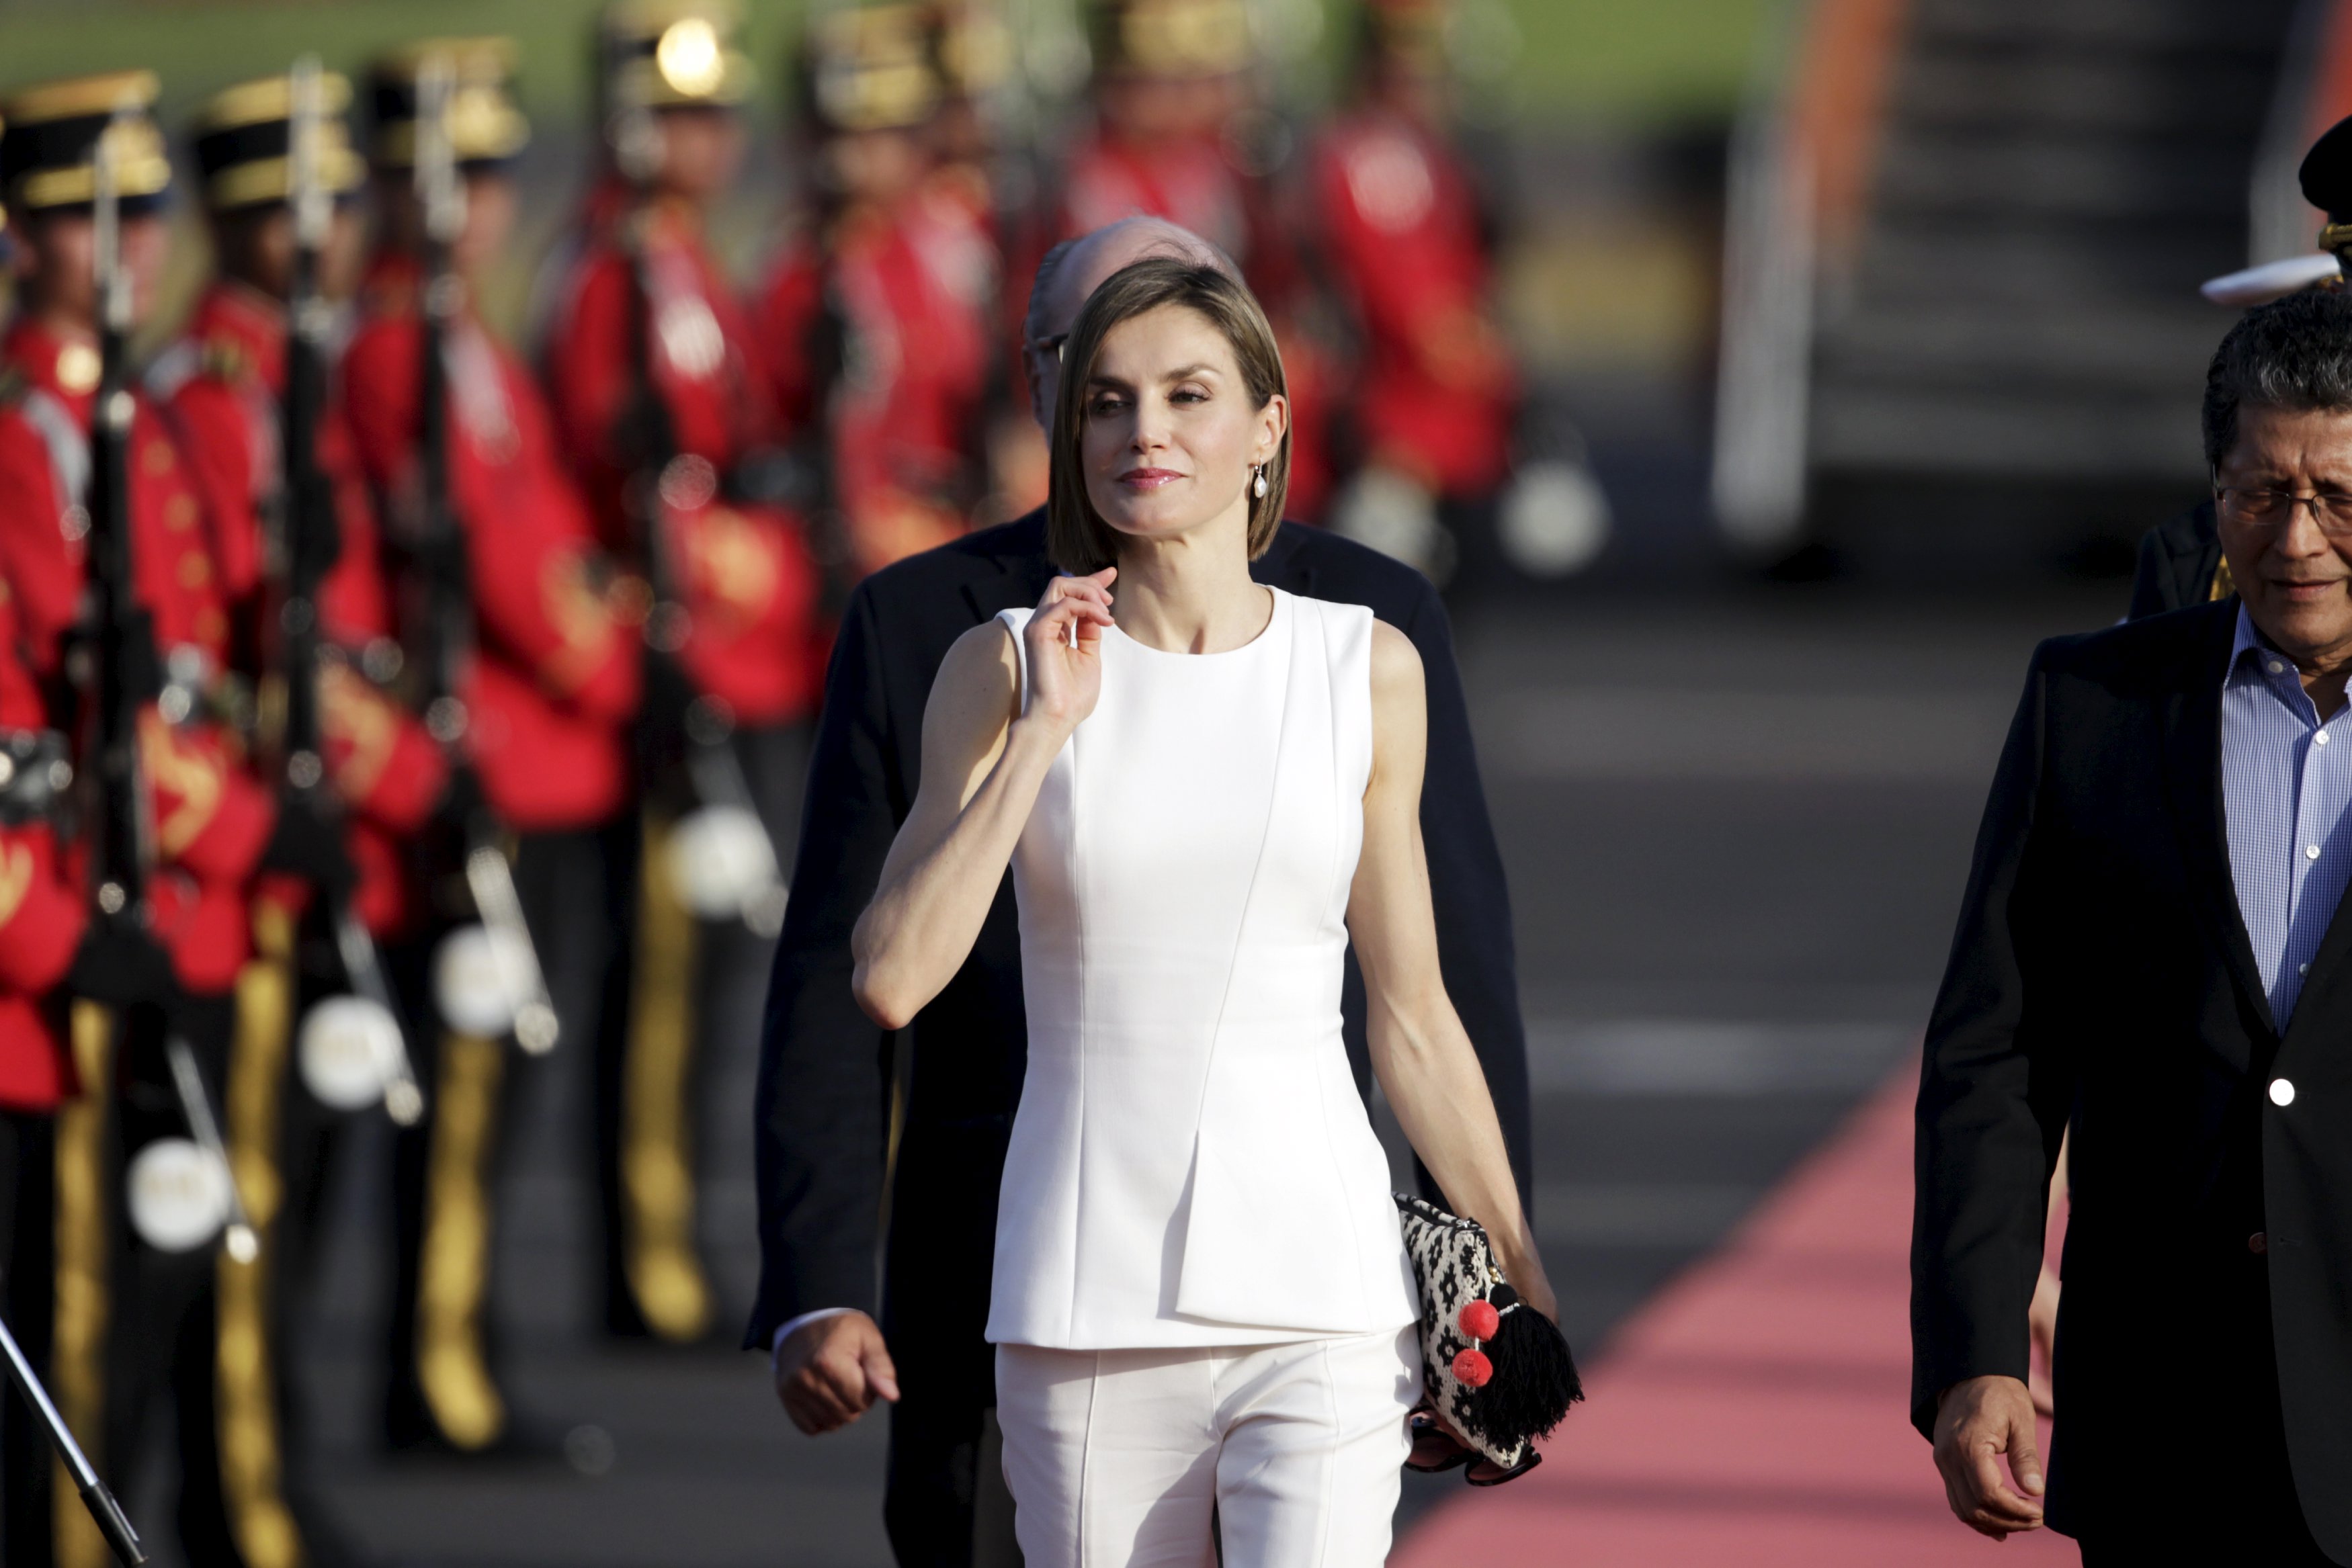 Spain's Queen Letizia walks with El Salvador's Vice-Minister of Foreign Affairs Jaime Miranda after her arrival for an official visit, at the Oscar Arnulfo Romero International Airport in Comalapa